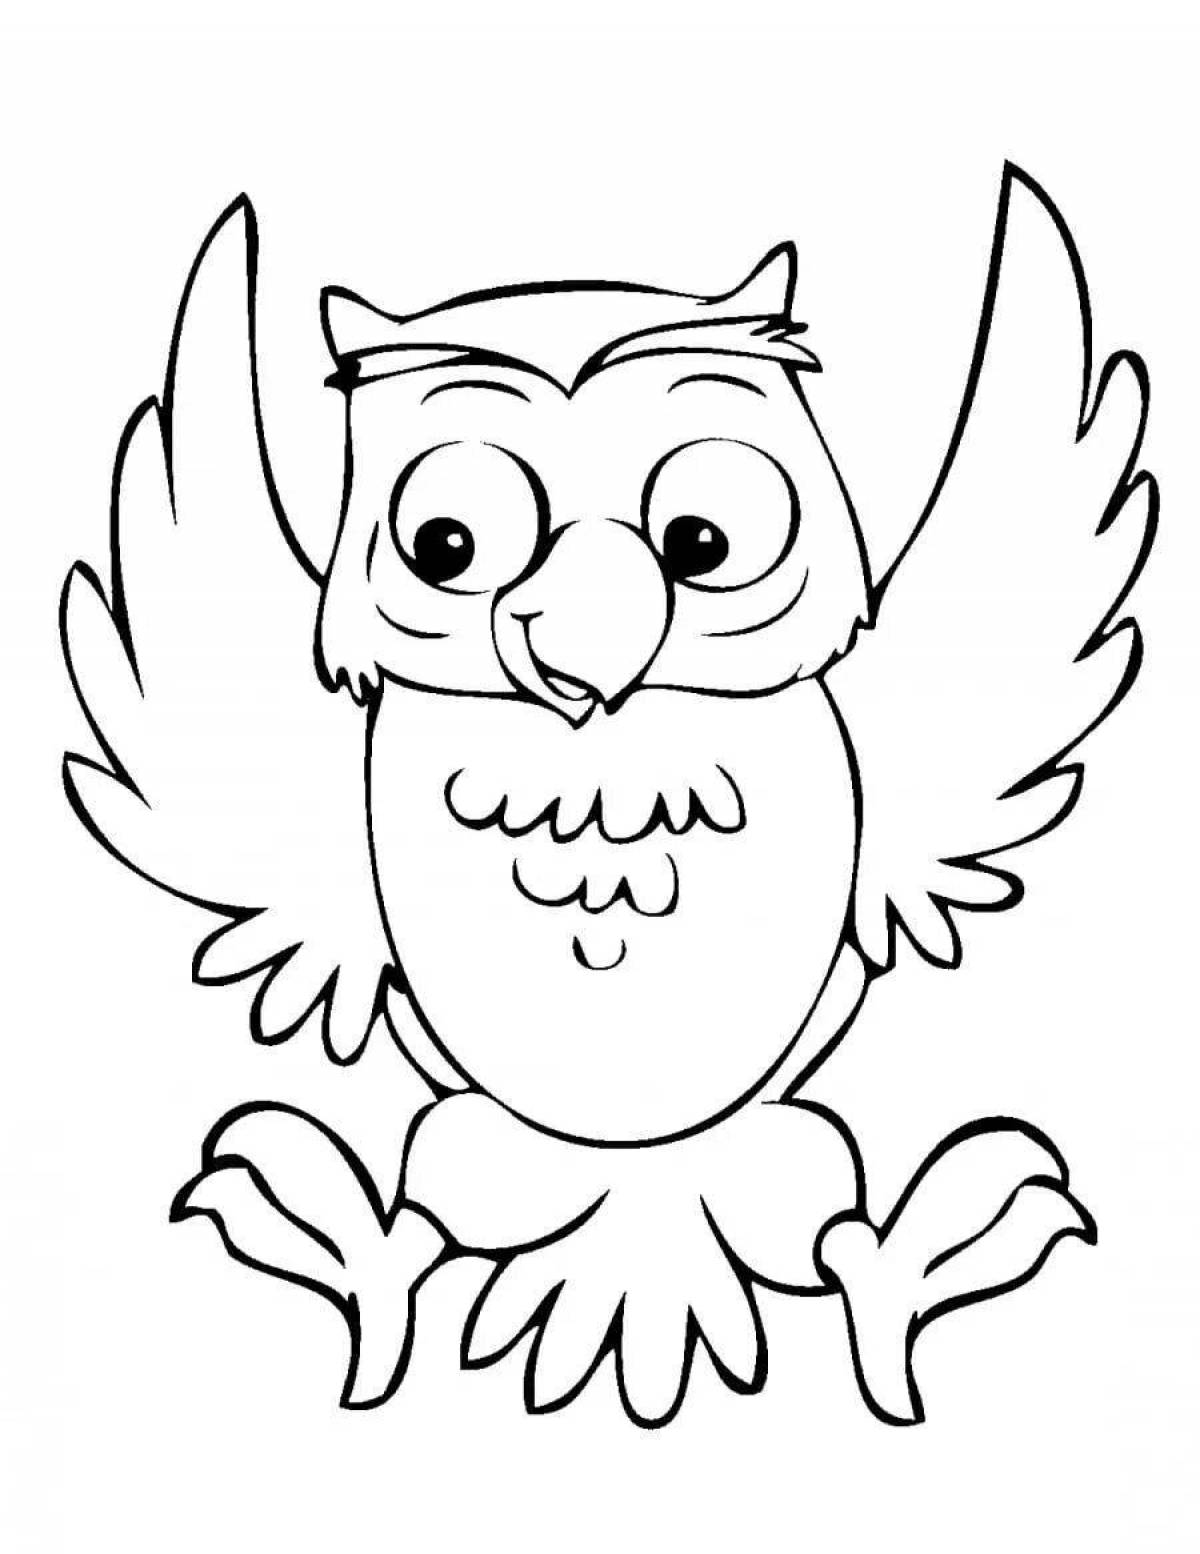 Delightful coloring drawing of an owl